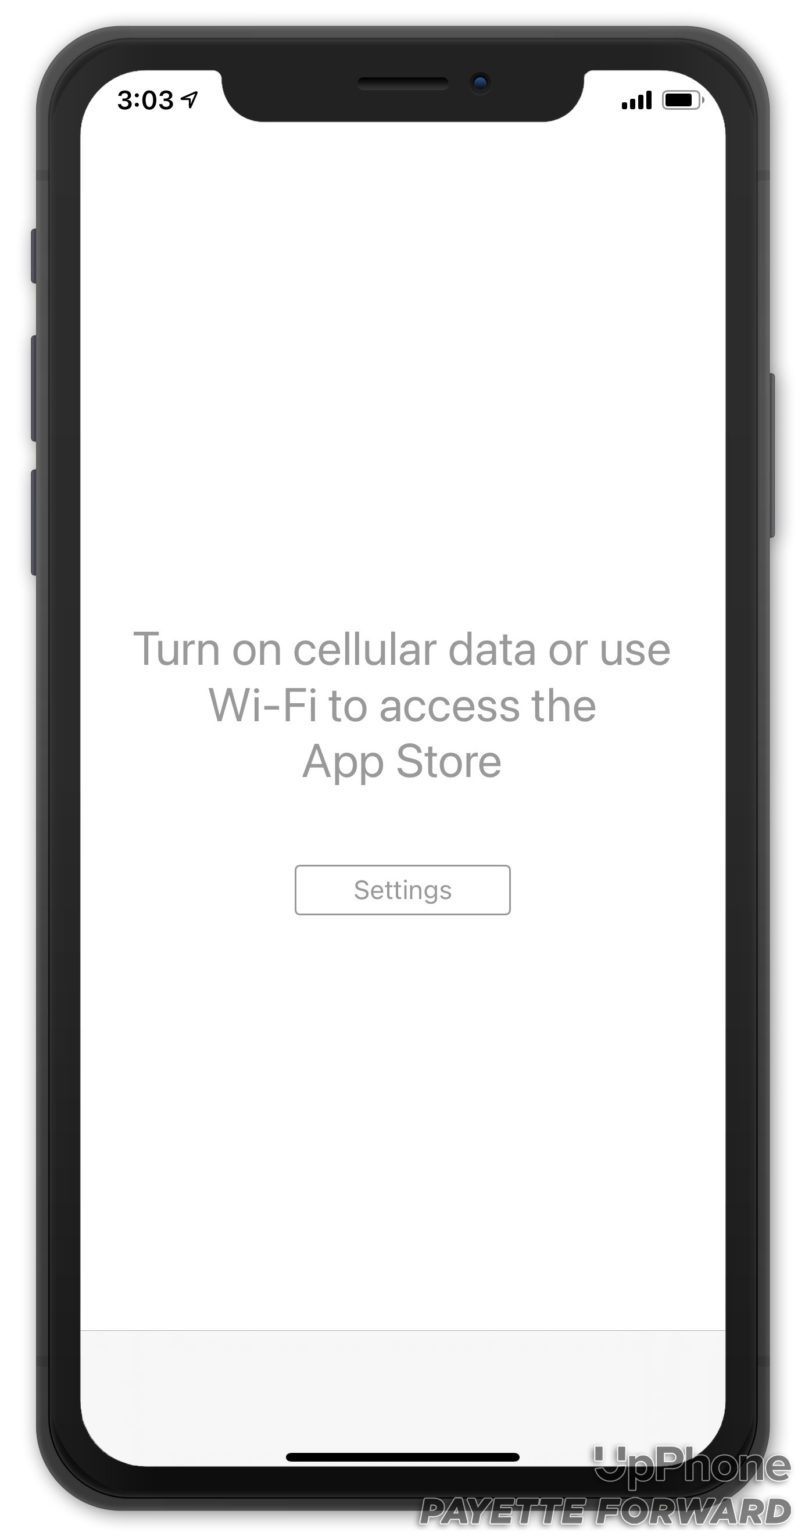 cannot find wifispoof app